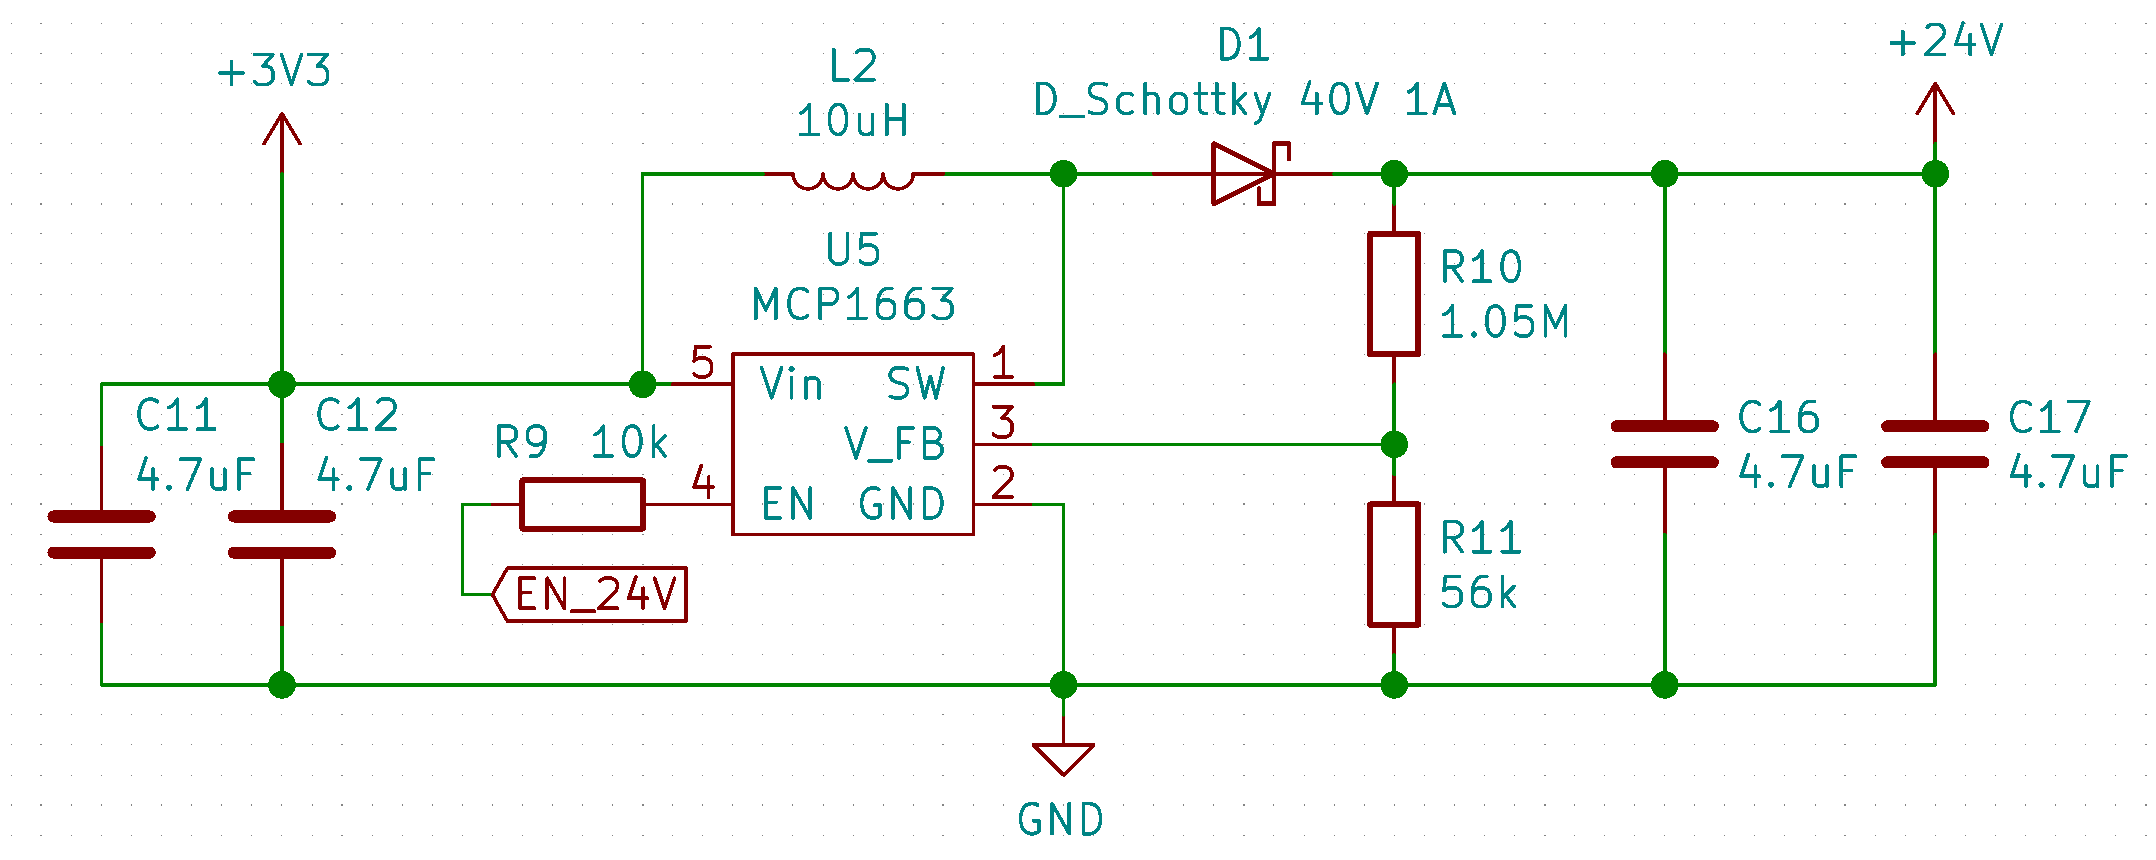 Schematic of the 24V supply